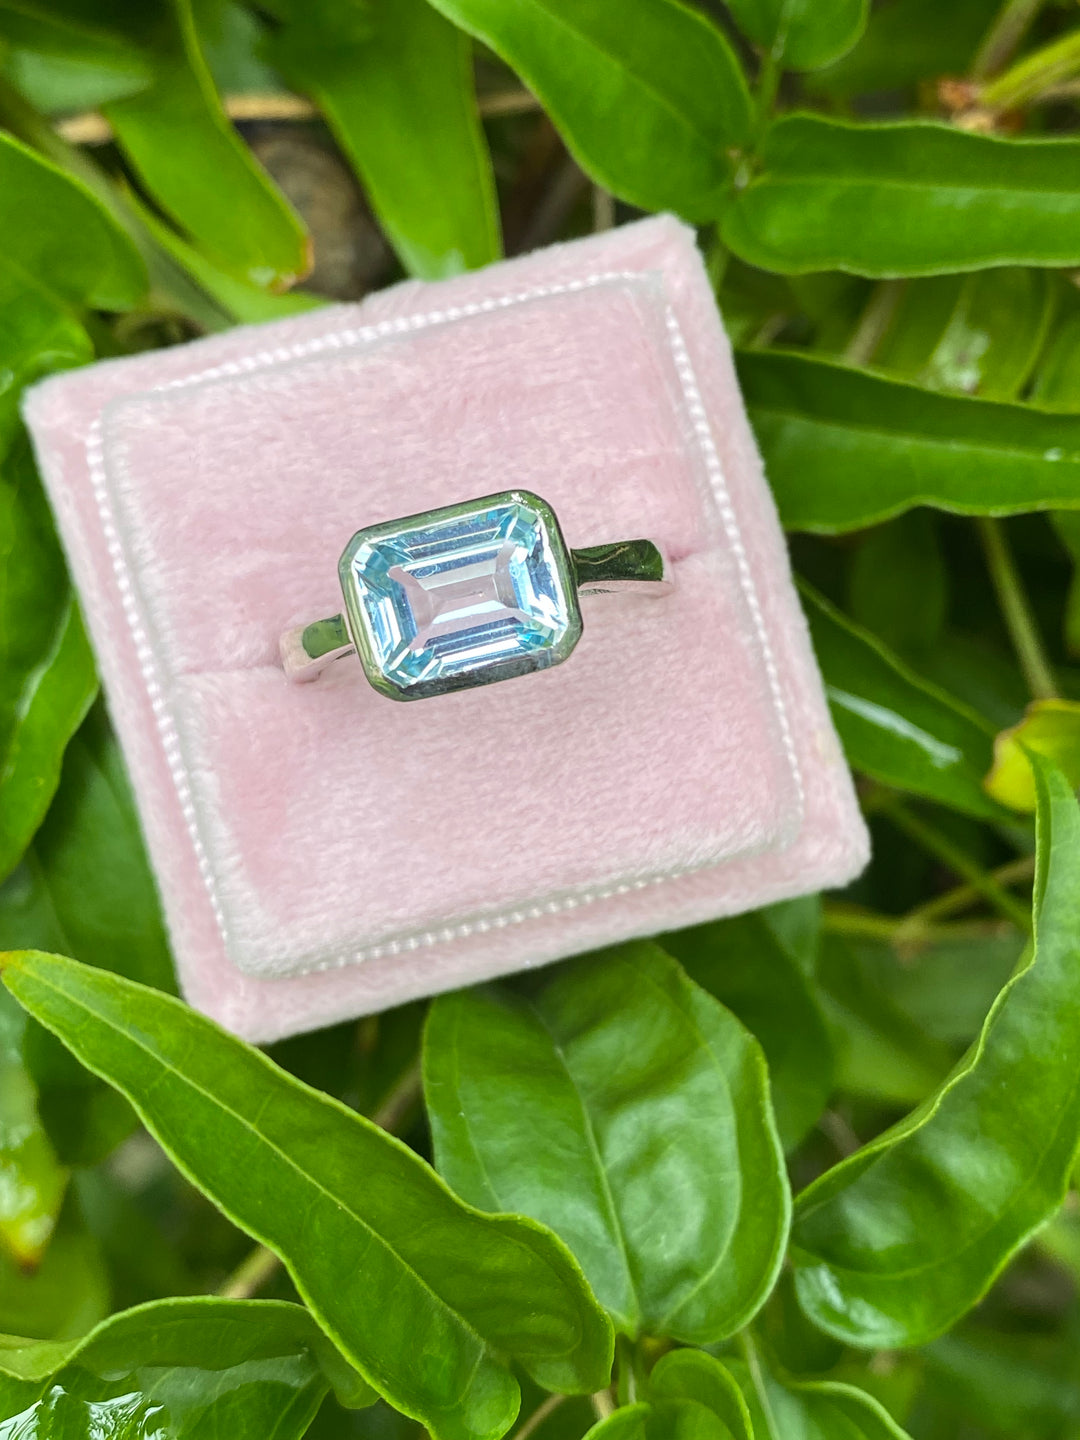 3.00 Carat Emerald Cut Blue Topaz East West Solitaire Ring in Sterling Silver